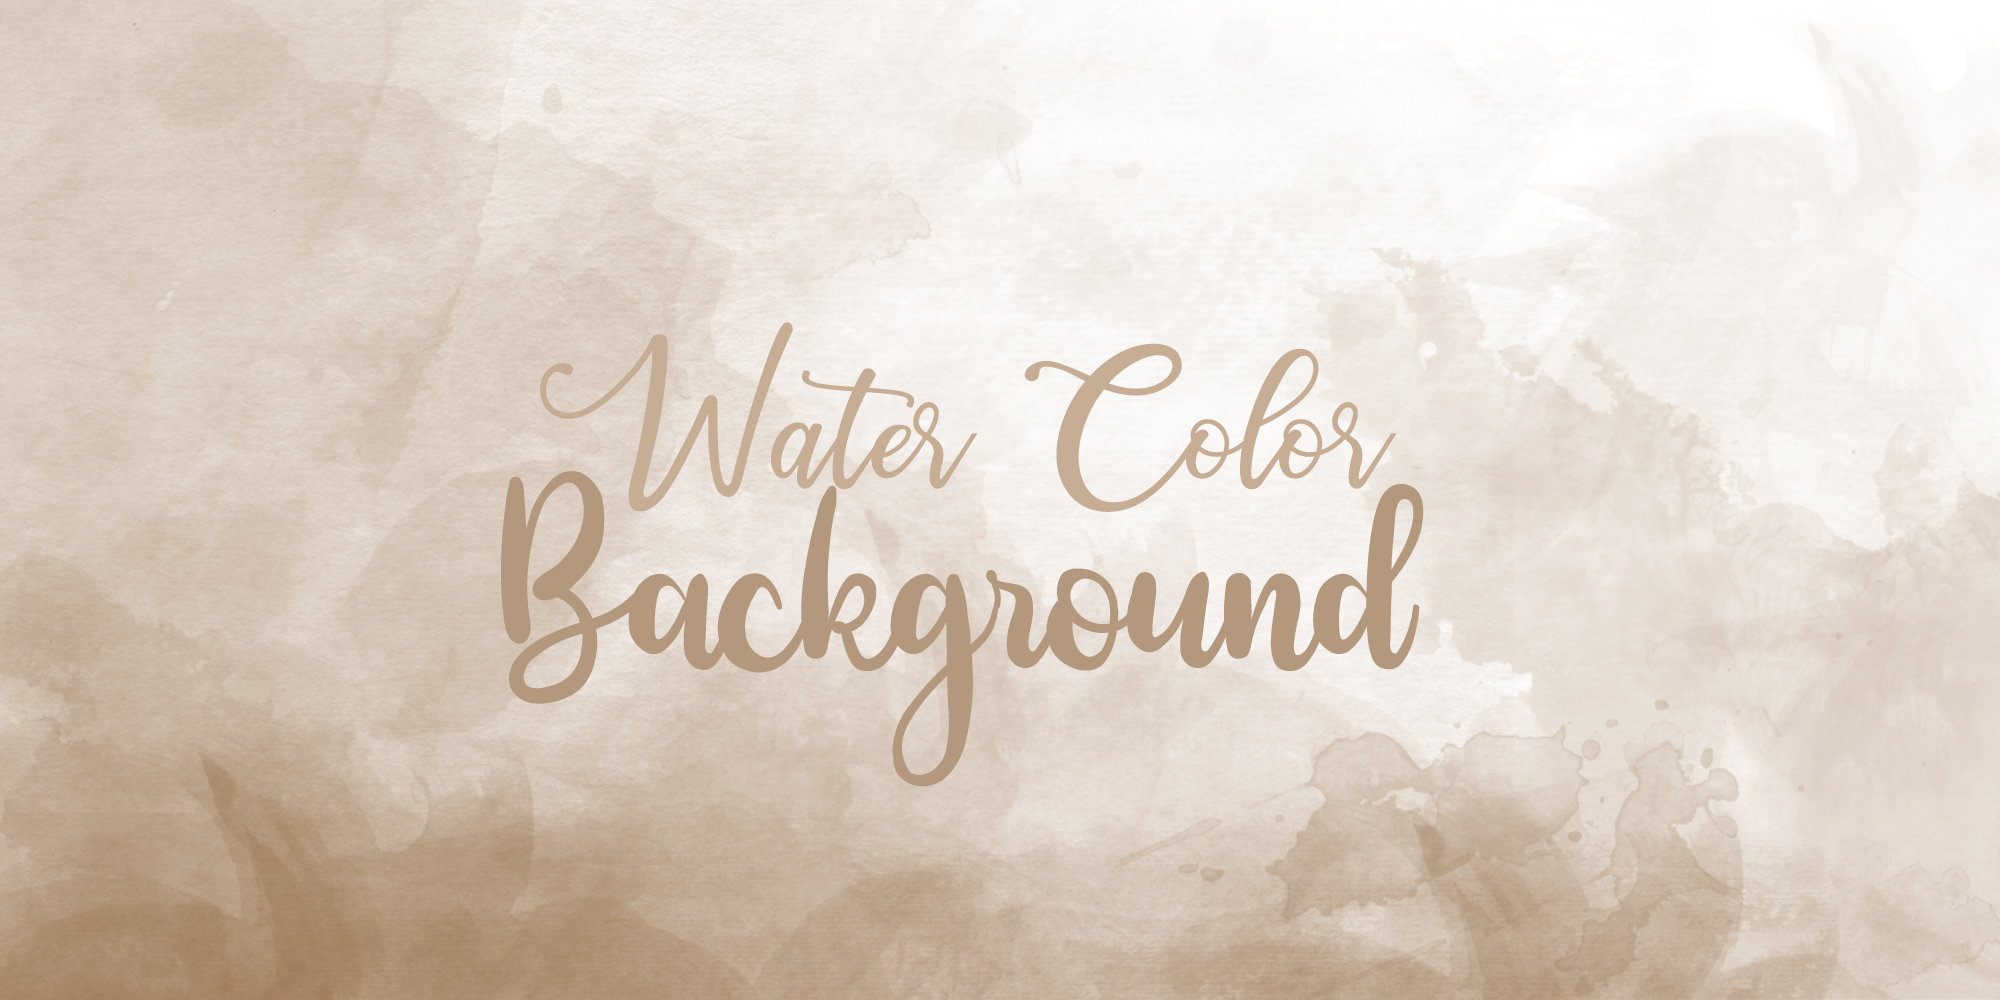 Fashion Brown Watercolor Background Download Free | Banner Background Image  on Lovepik | 450015354